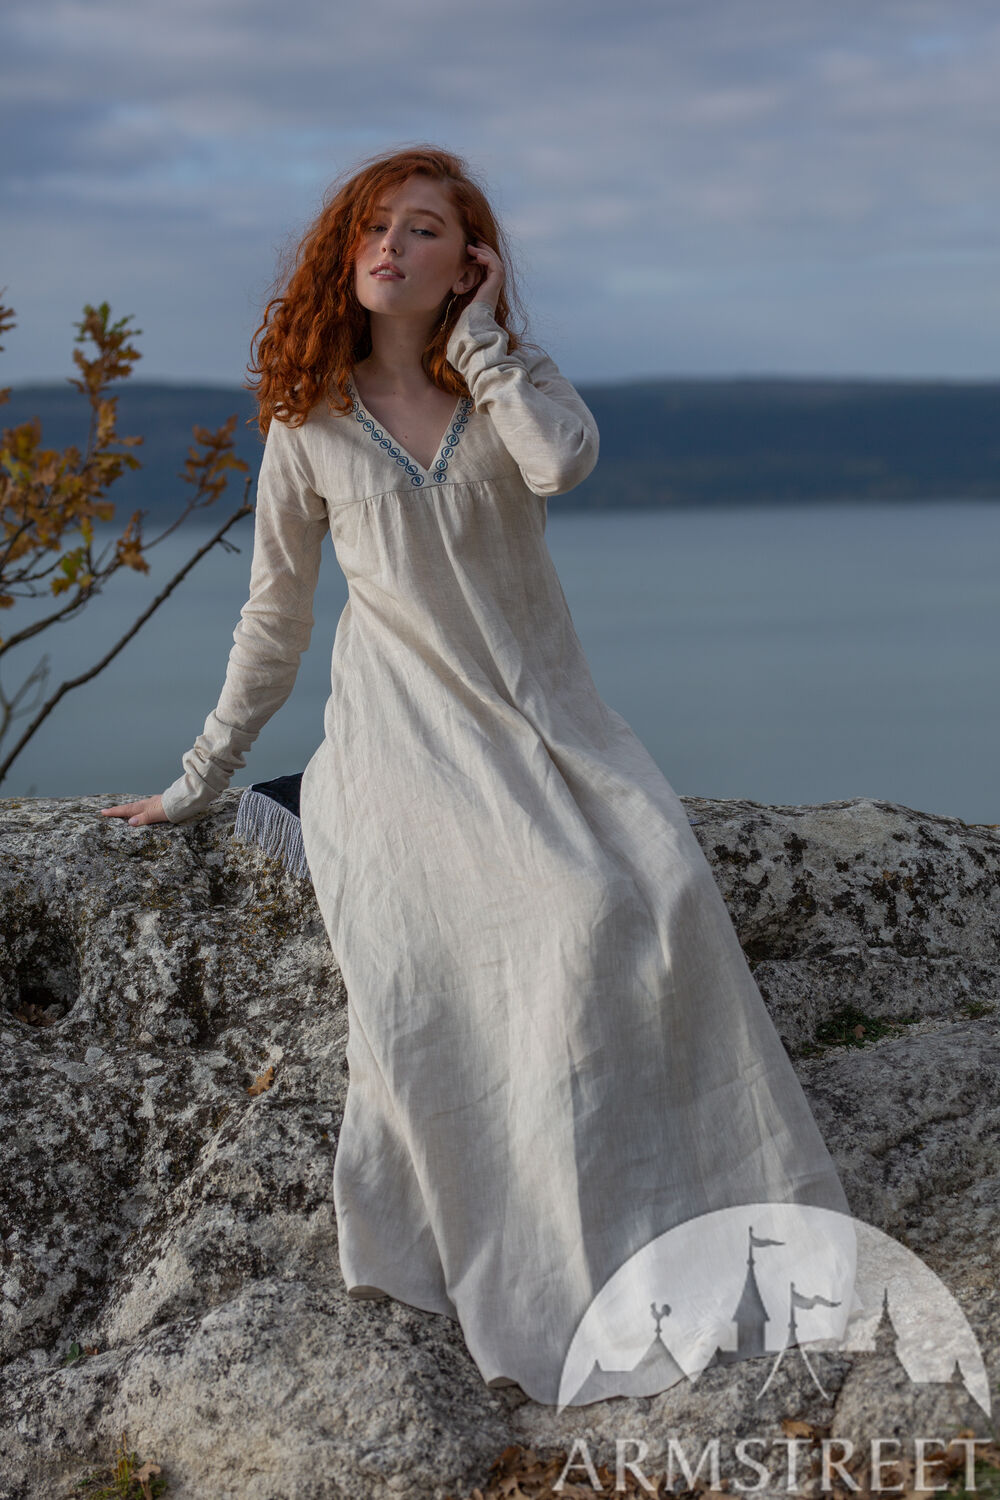 Flax linen undertunic with hand embroidery “Sea Born”